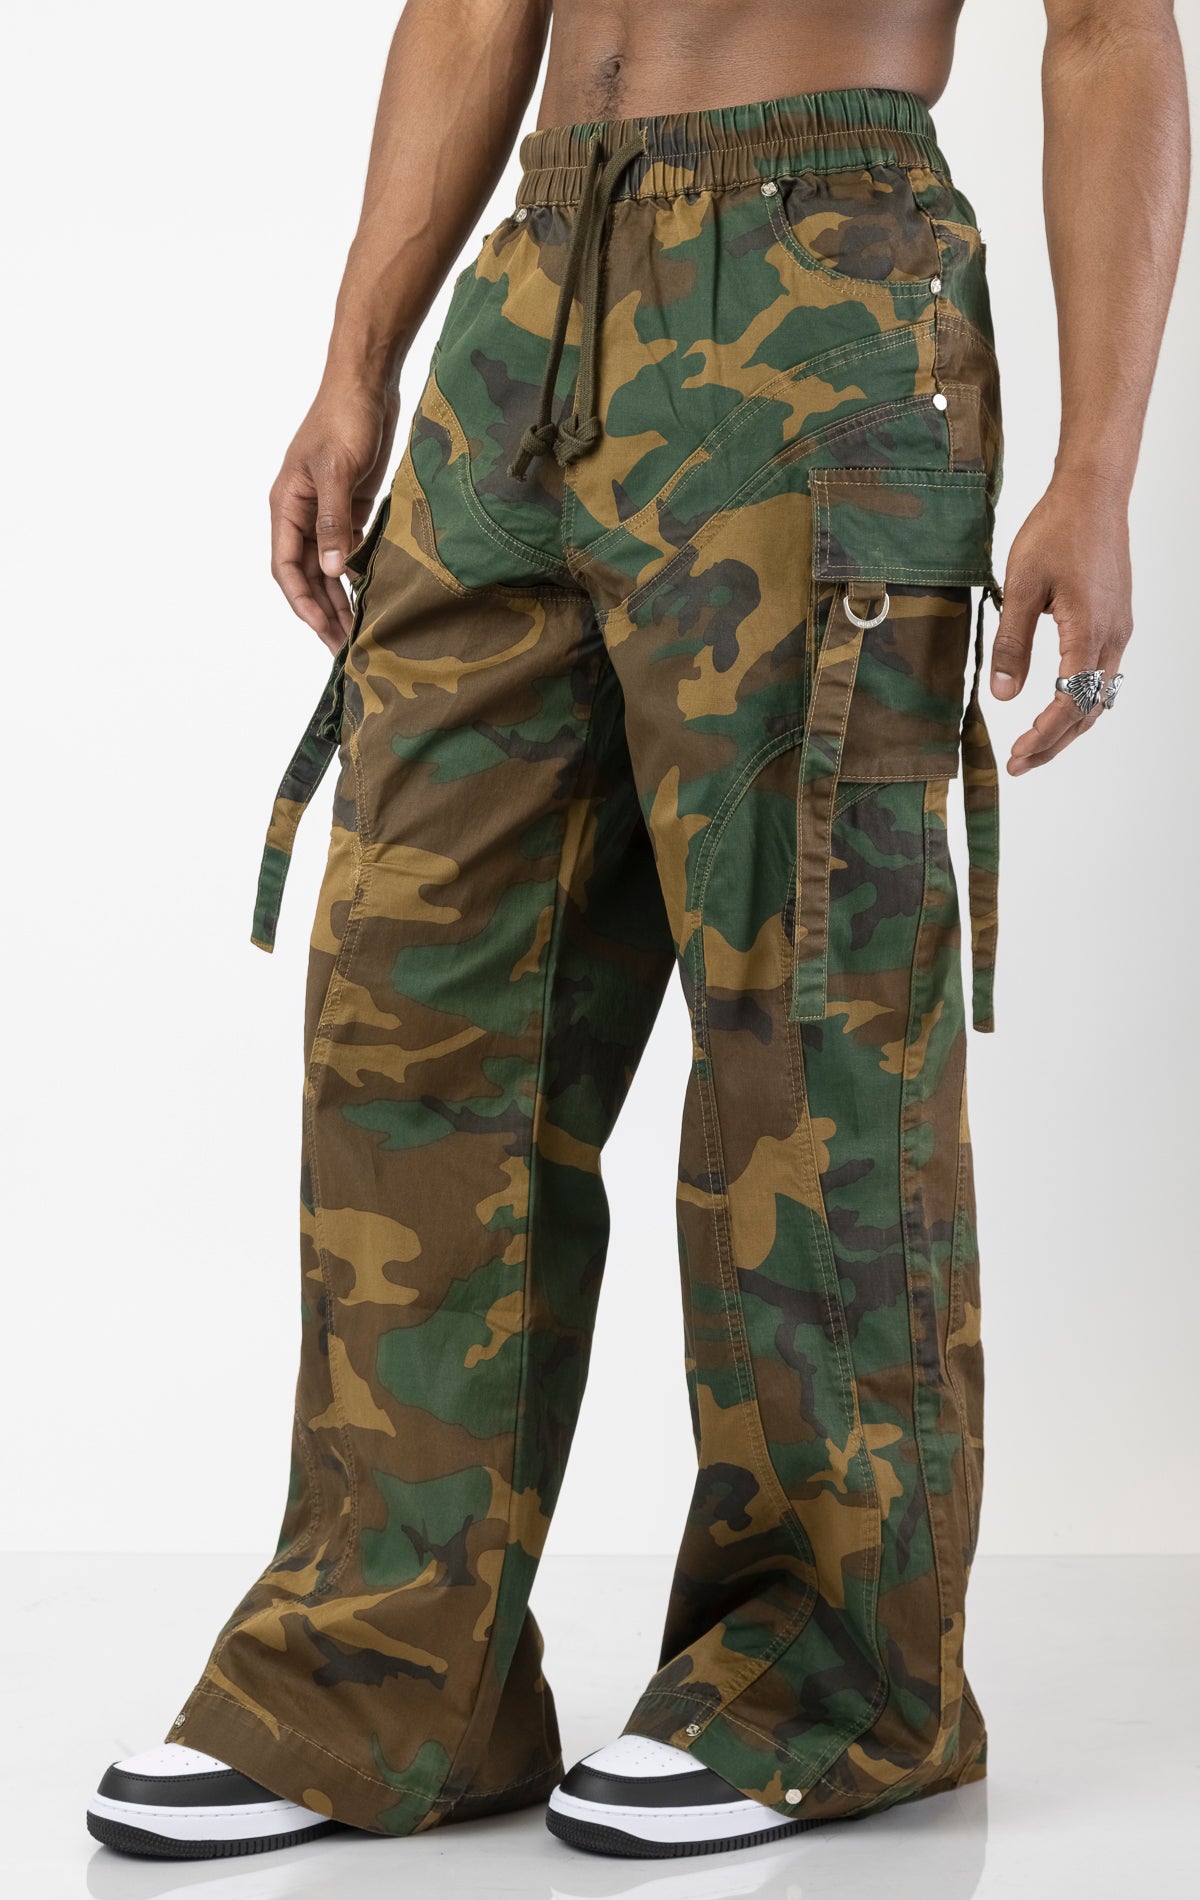 Men's baggy cargo pants in camo. The pants feature a wide, relaxed fit from the waist down, paneled construction, spacious cargo pockets with loop closures and functional tightening straps, and custom hardware. Made from a blend of 98% cotton and 2% spandex.